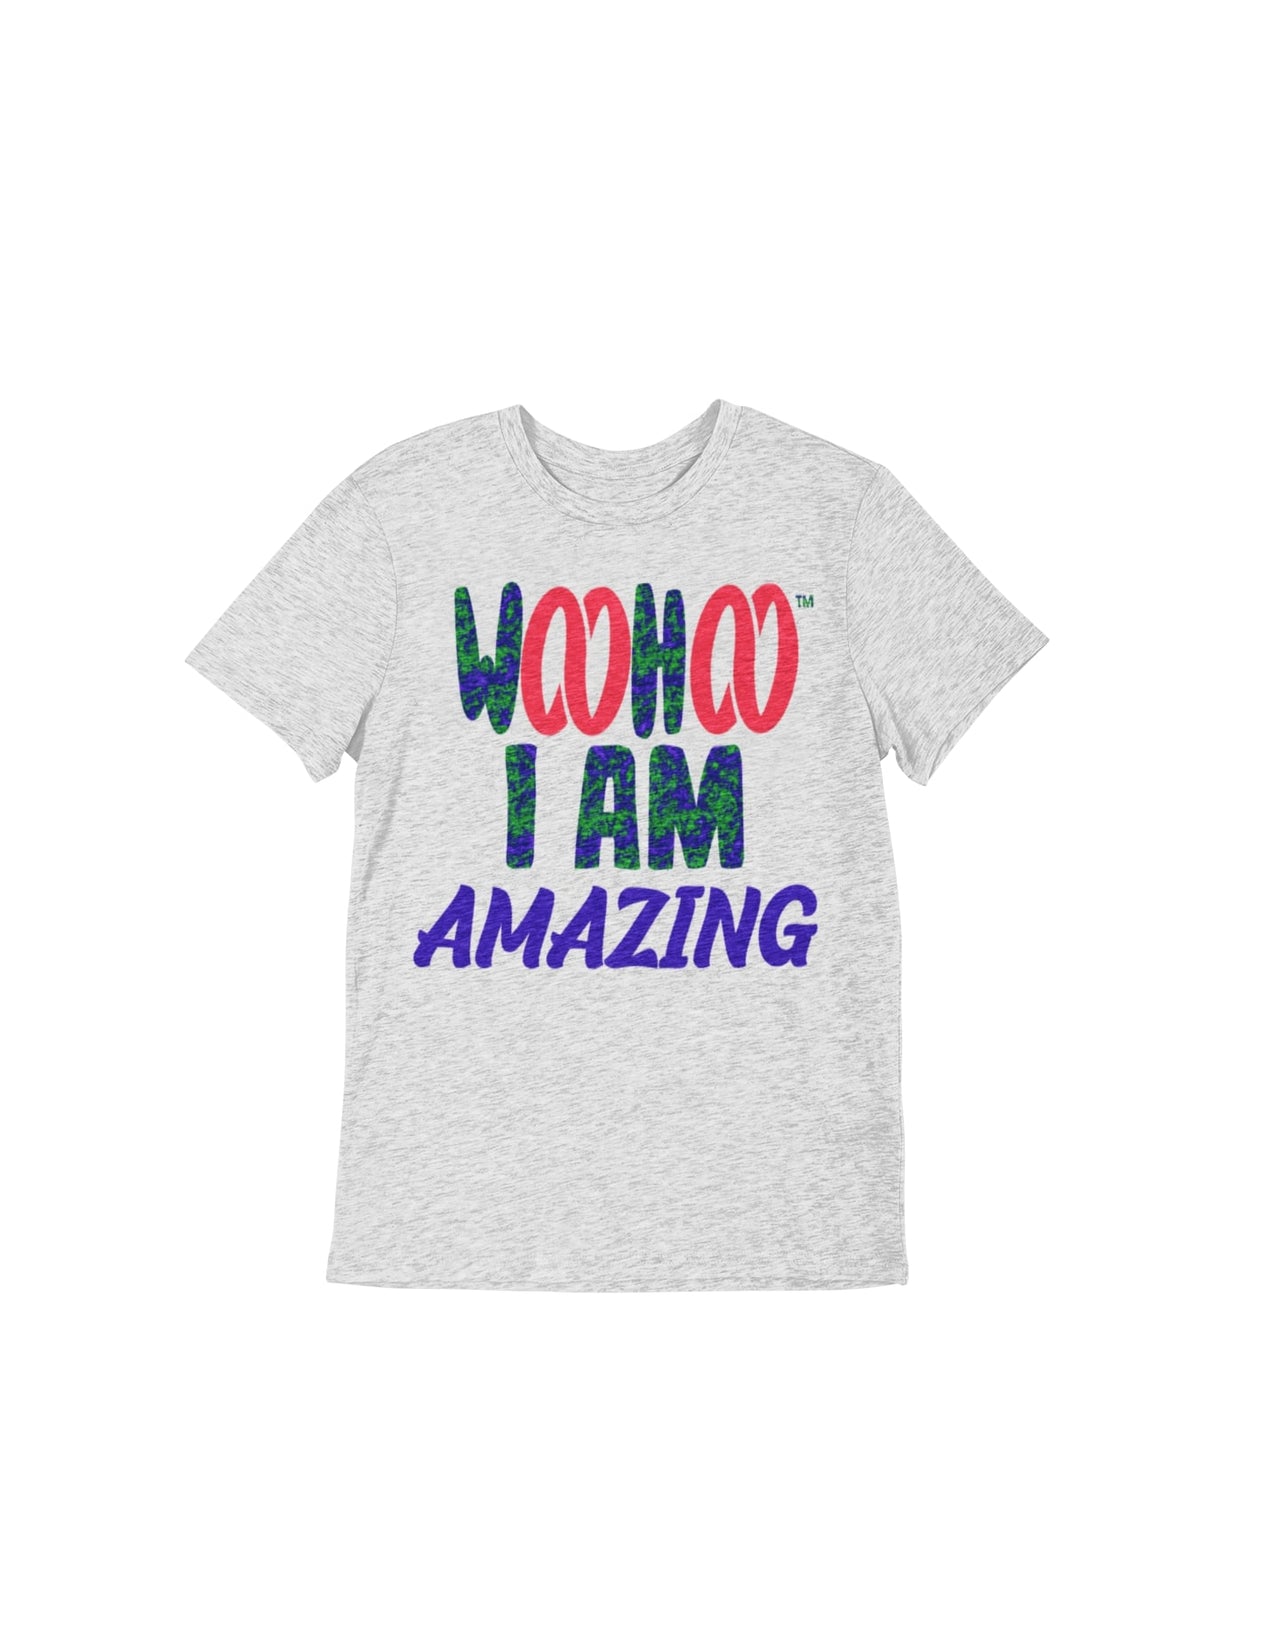 Heather Gray Unisex T-shirt featuring the text 'WooHoo I Am amazing' in a cool font, designed by WooHoo Apparel.